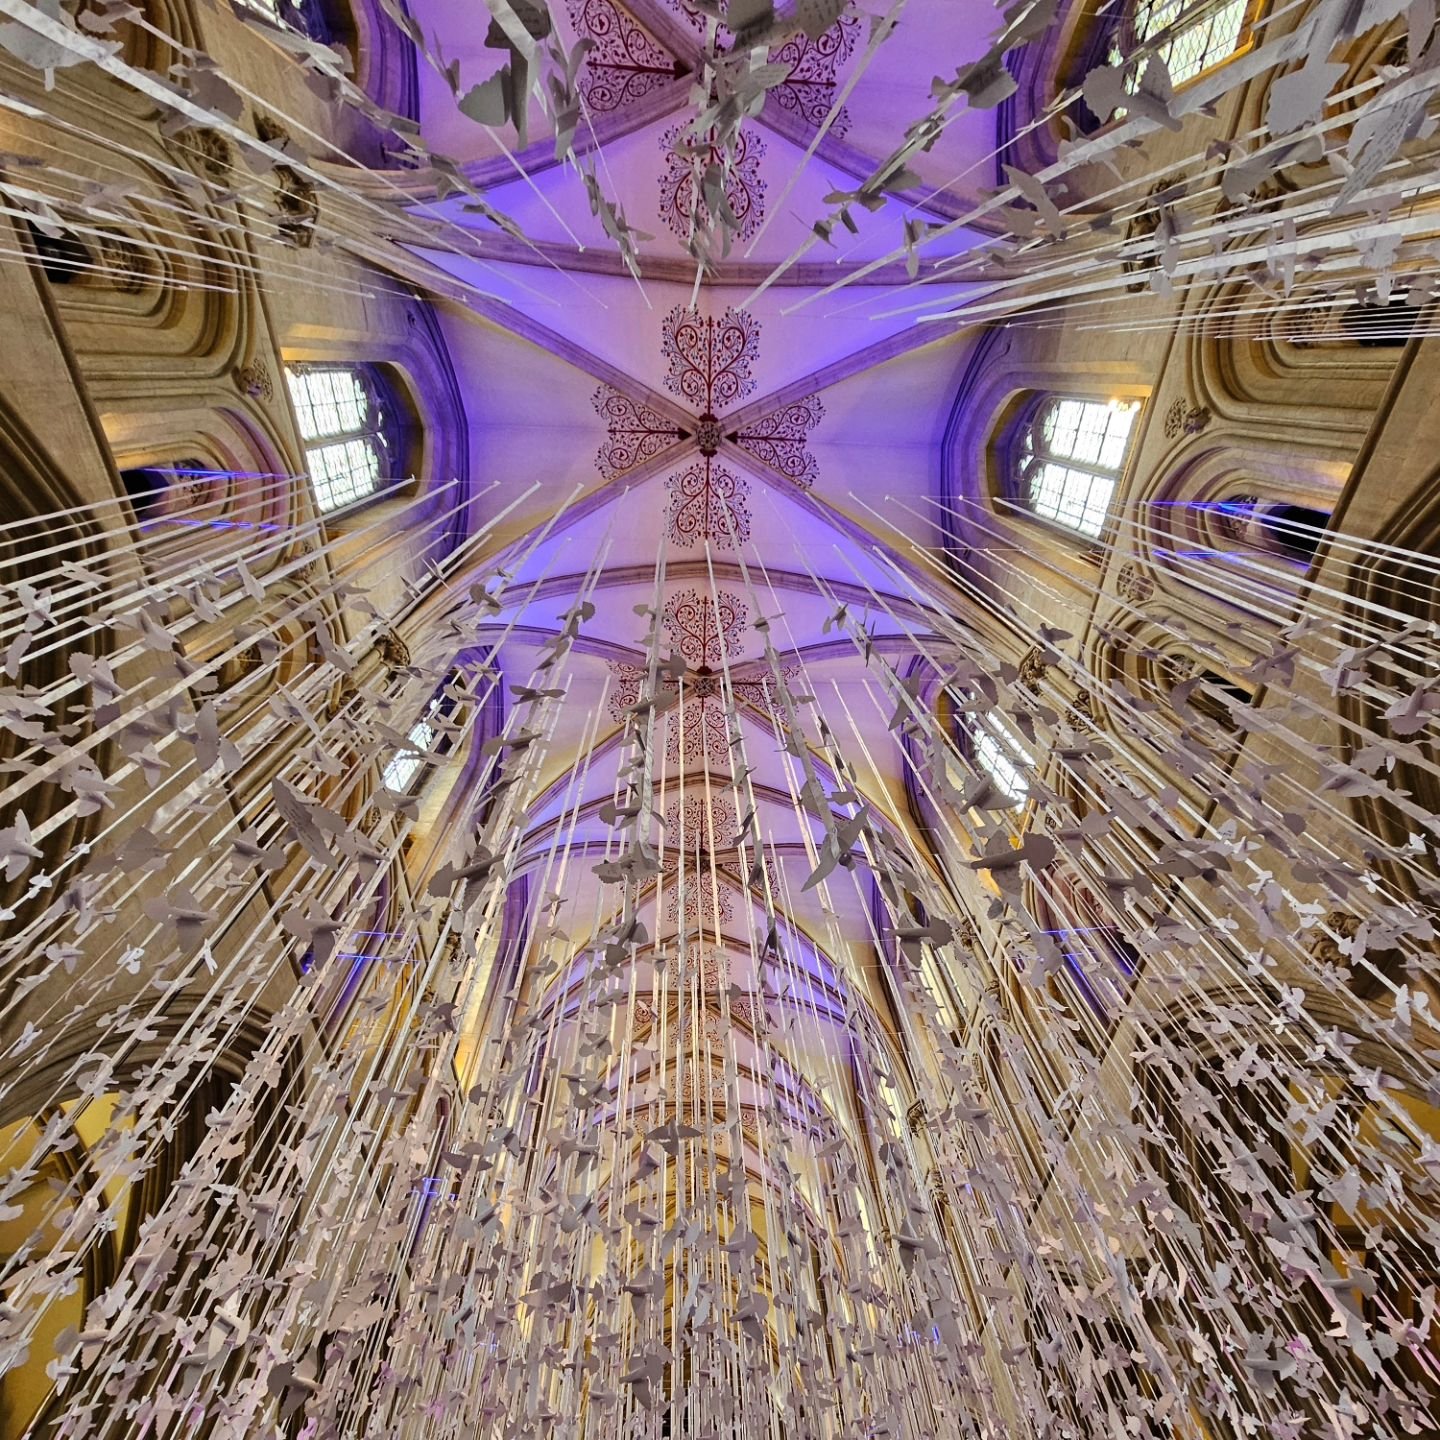 🕊 Peace Doves 🕊

A couple of months ago I wrote a little message on a dove at the cathedral and last weekend, I went to visit the beautiful display. It was absolutely incredible walking under the doves knowing that mine was up there alongside many 